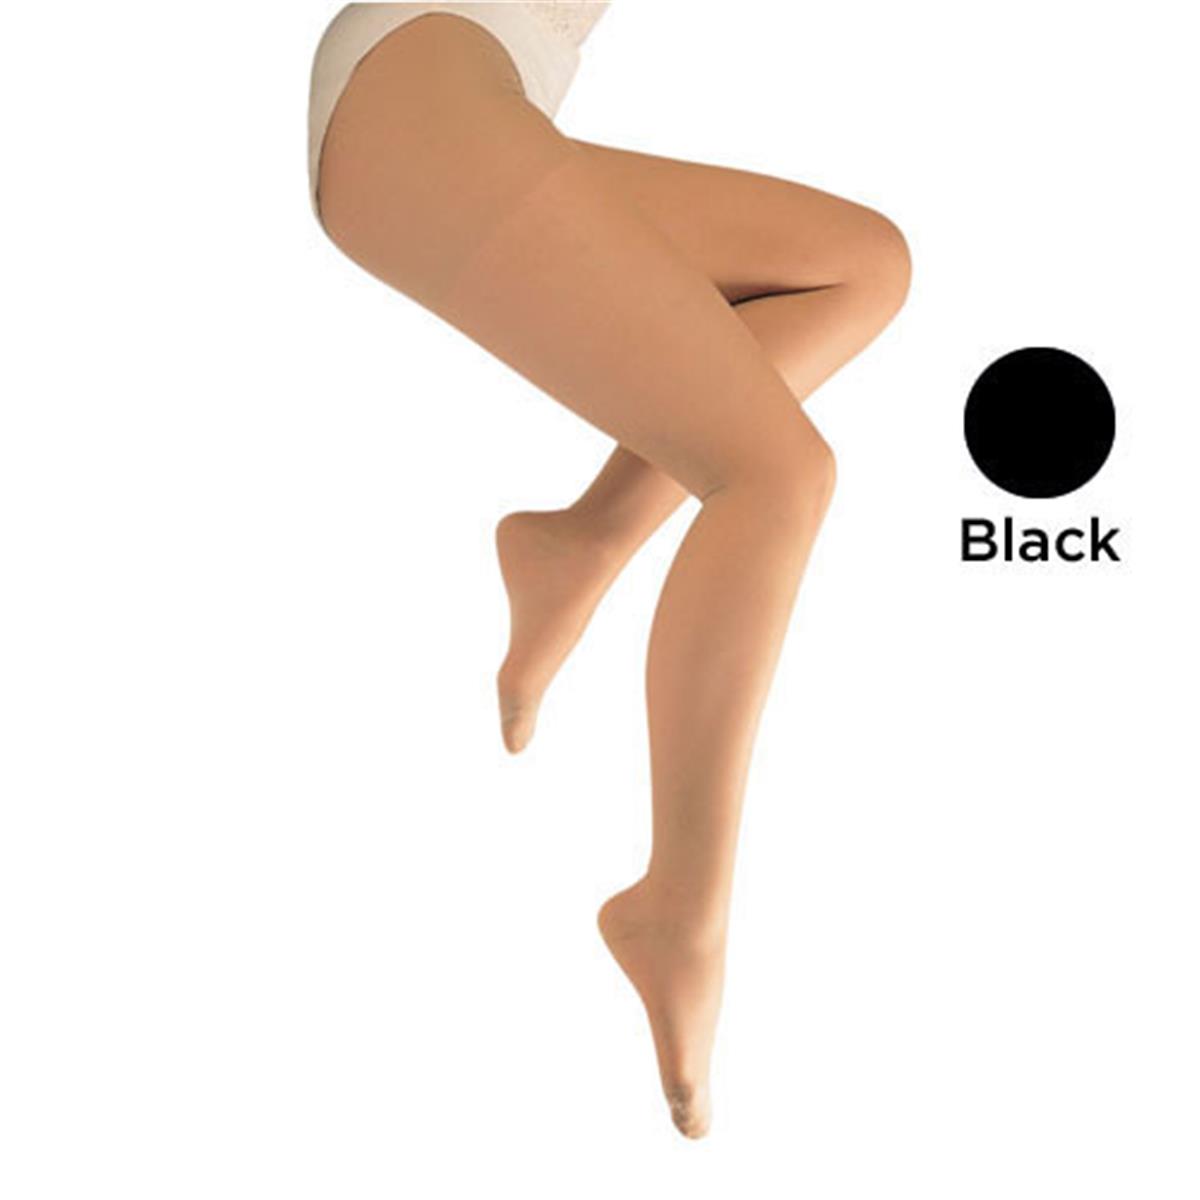 Picture of Blue Jay BJ365BLM 20-30 mmHg Ladies Sheer Firm Support Panty Hose, Black - Medium